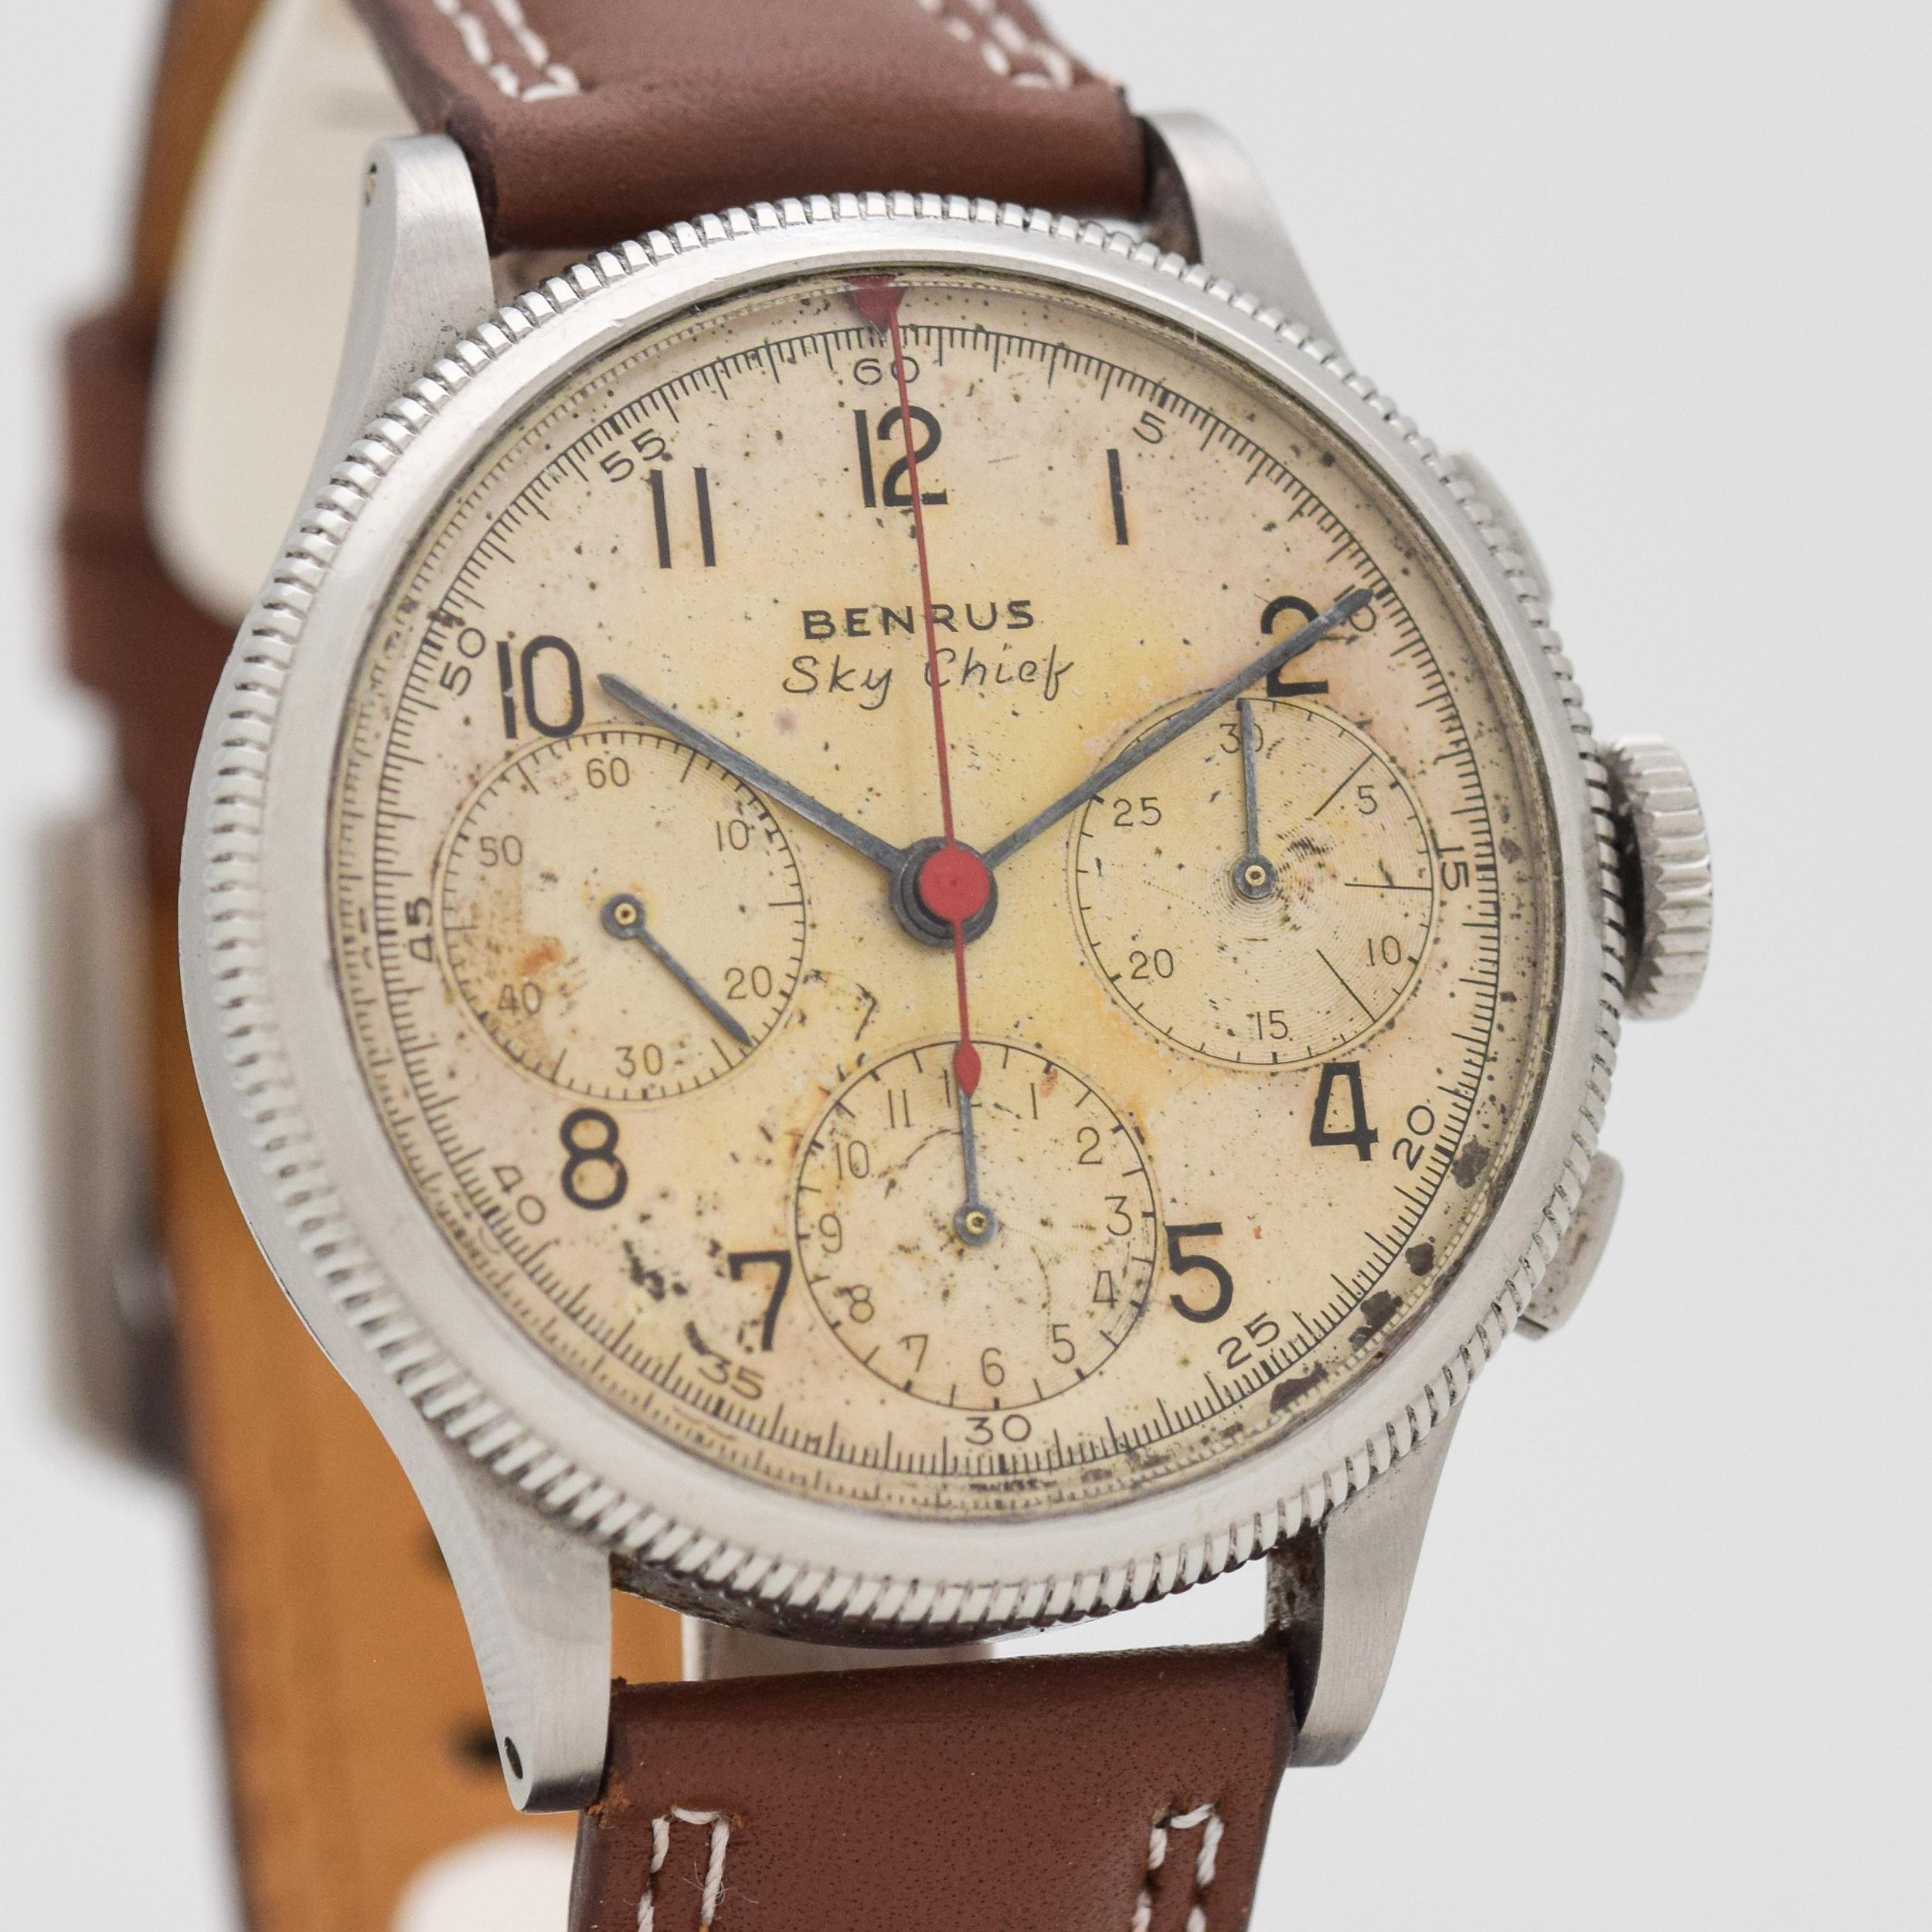 1940’s Vintage Benrus Sky Chief Large 38mm 3 Register Chronograph Stainless Steel Watch with Rotating Index Bezel with Original Patina Silver Dial with Arabic Numbers with Valjoux 71 Benrus Caliber GH-4 Movement. Triple Signed. Swiss-made.